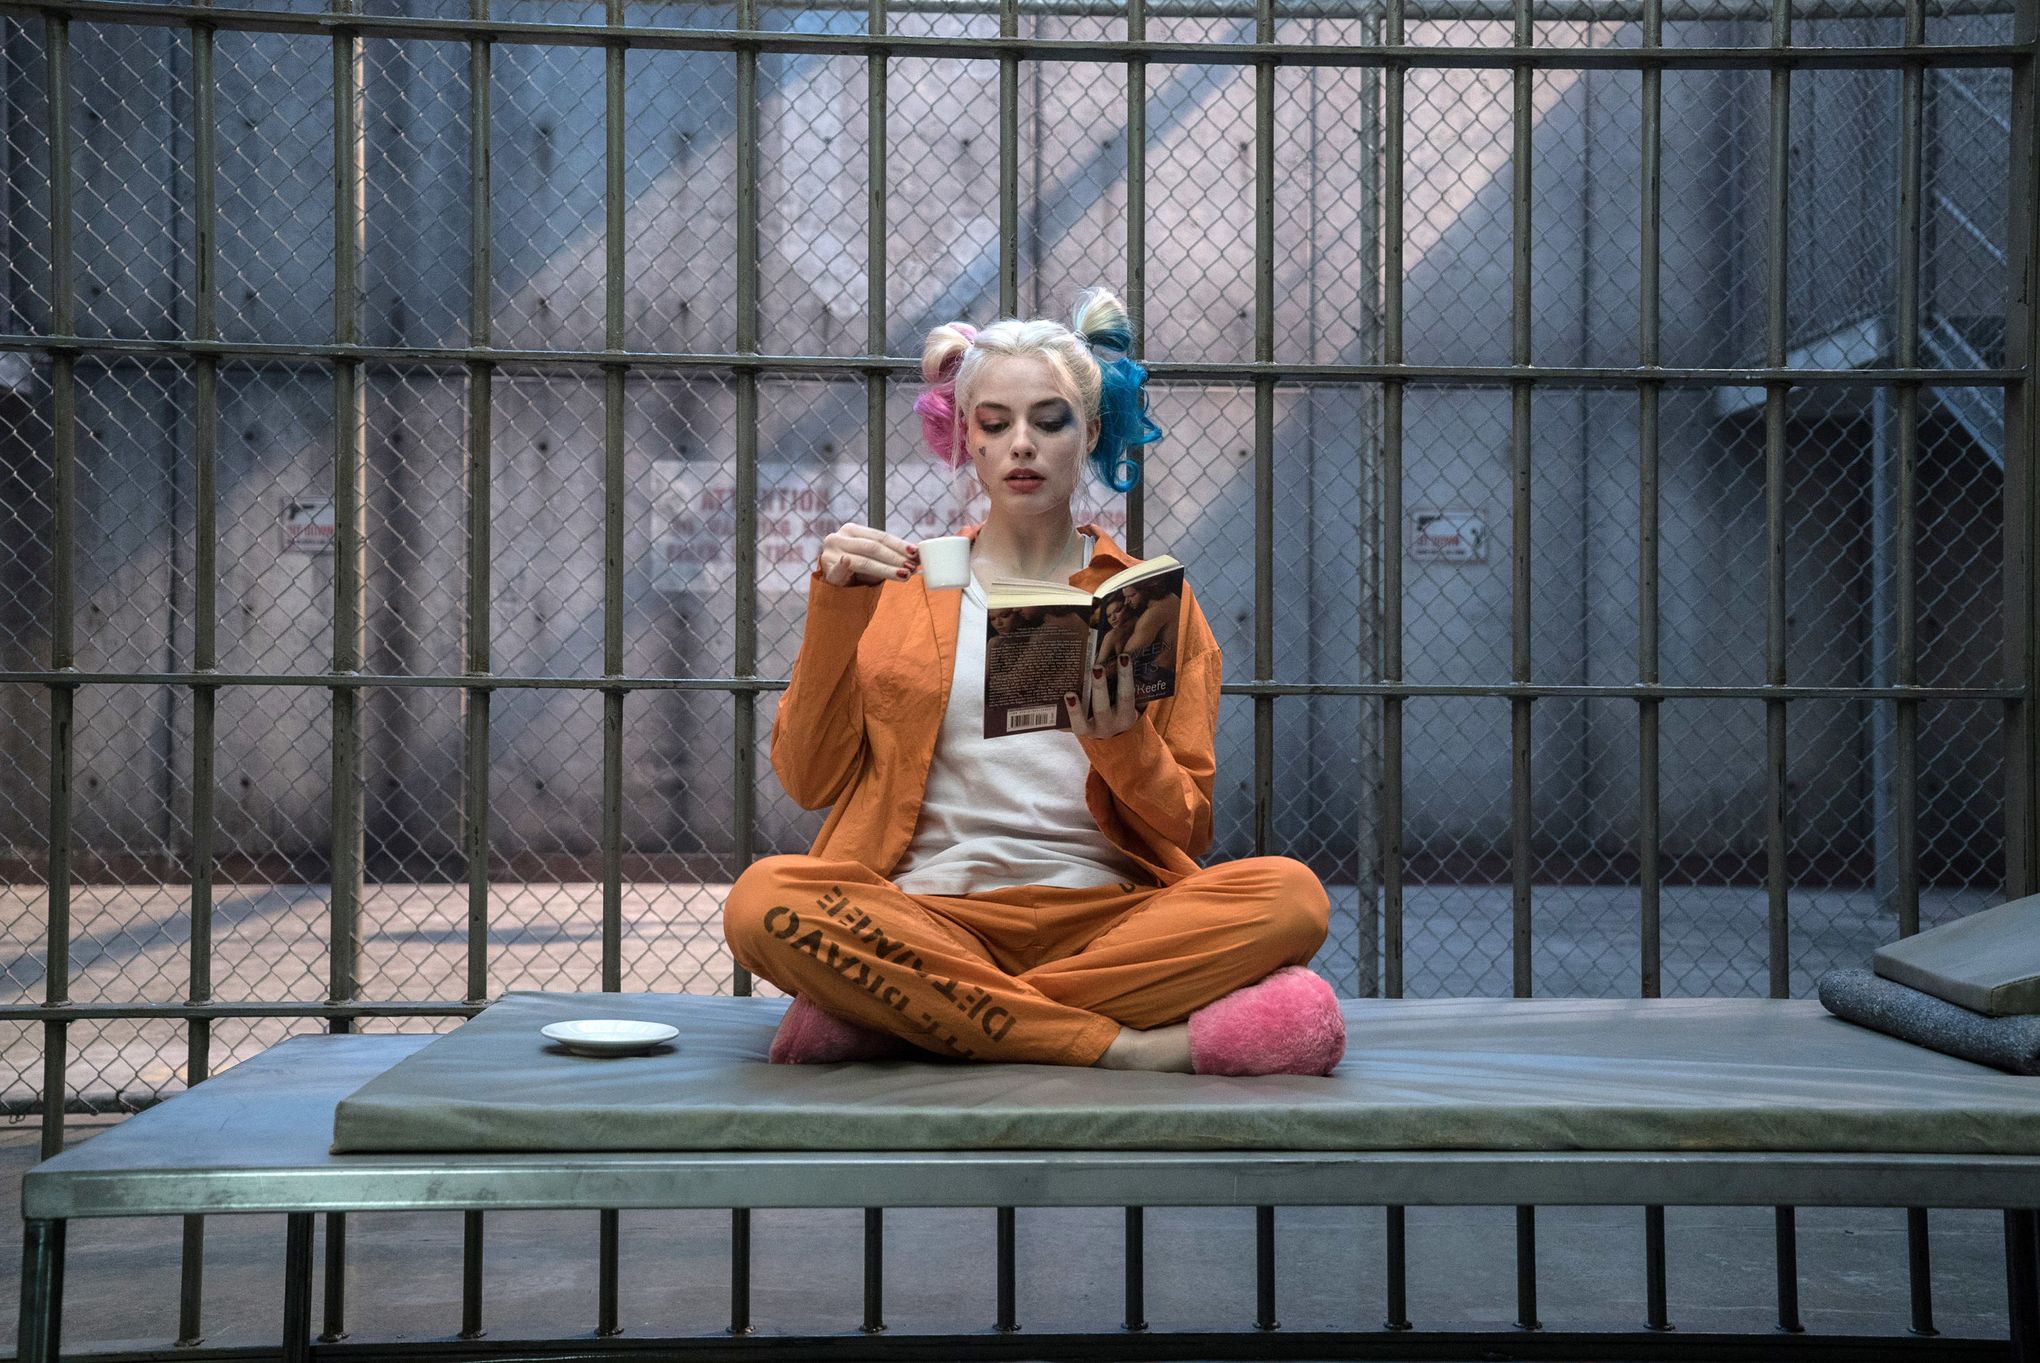 alexander atkin recommends harley quinn feet story pic